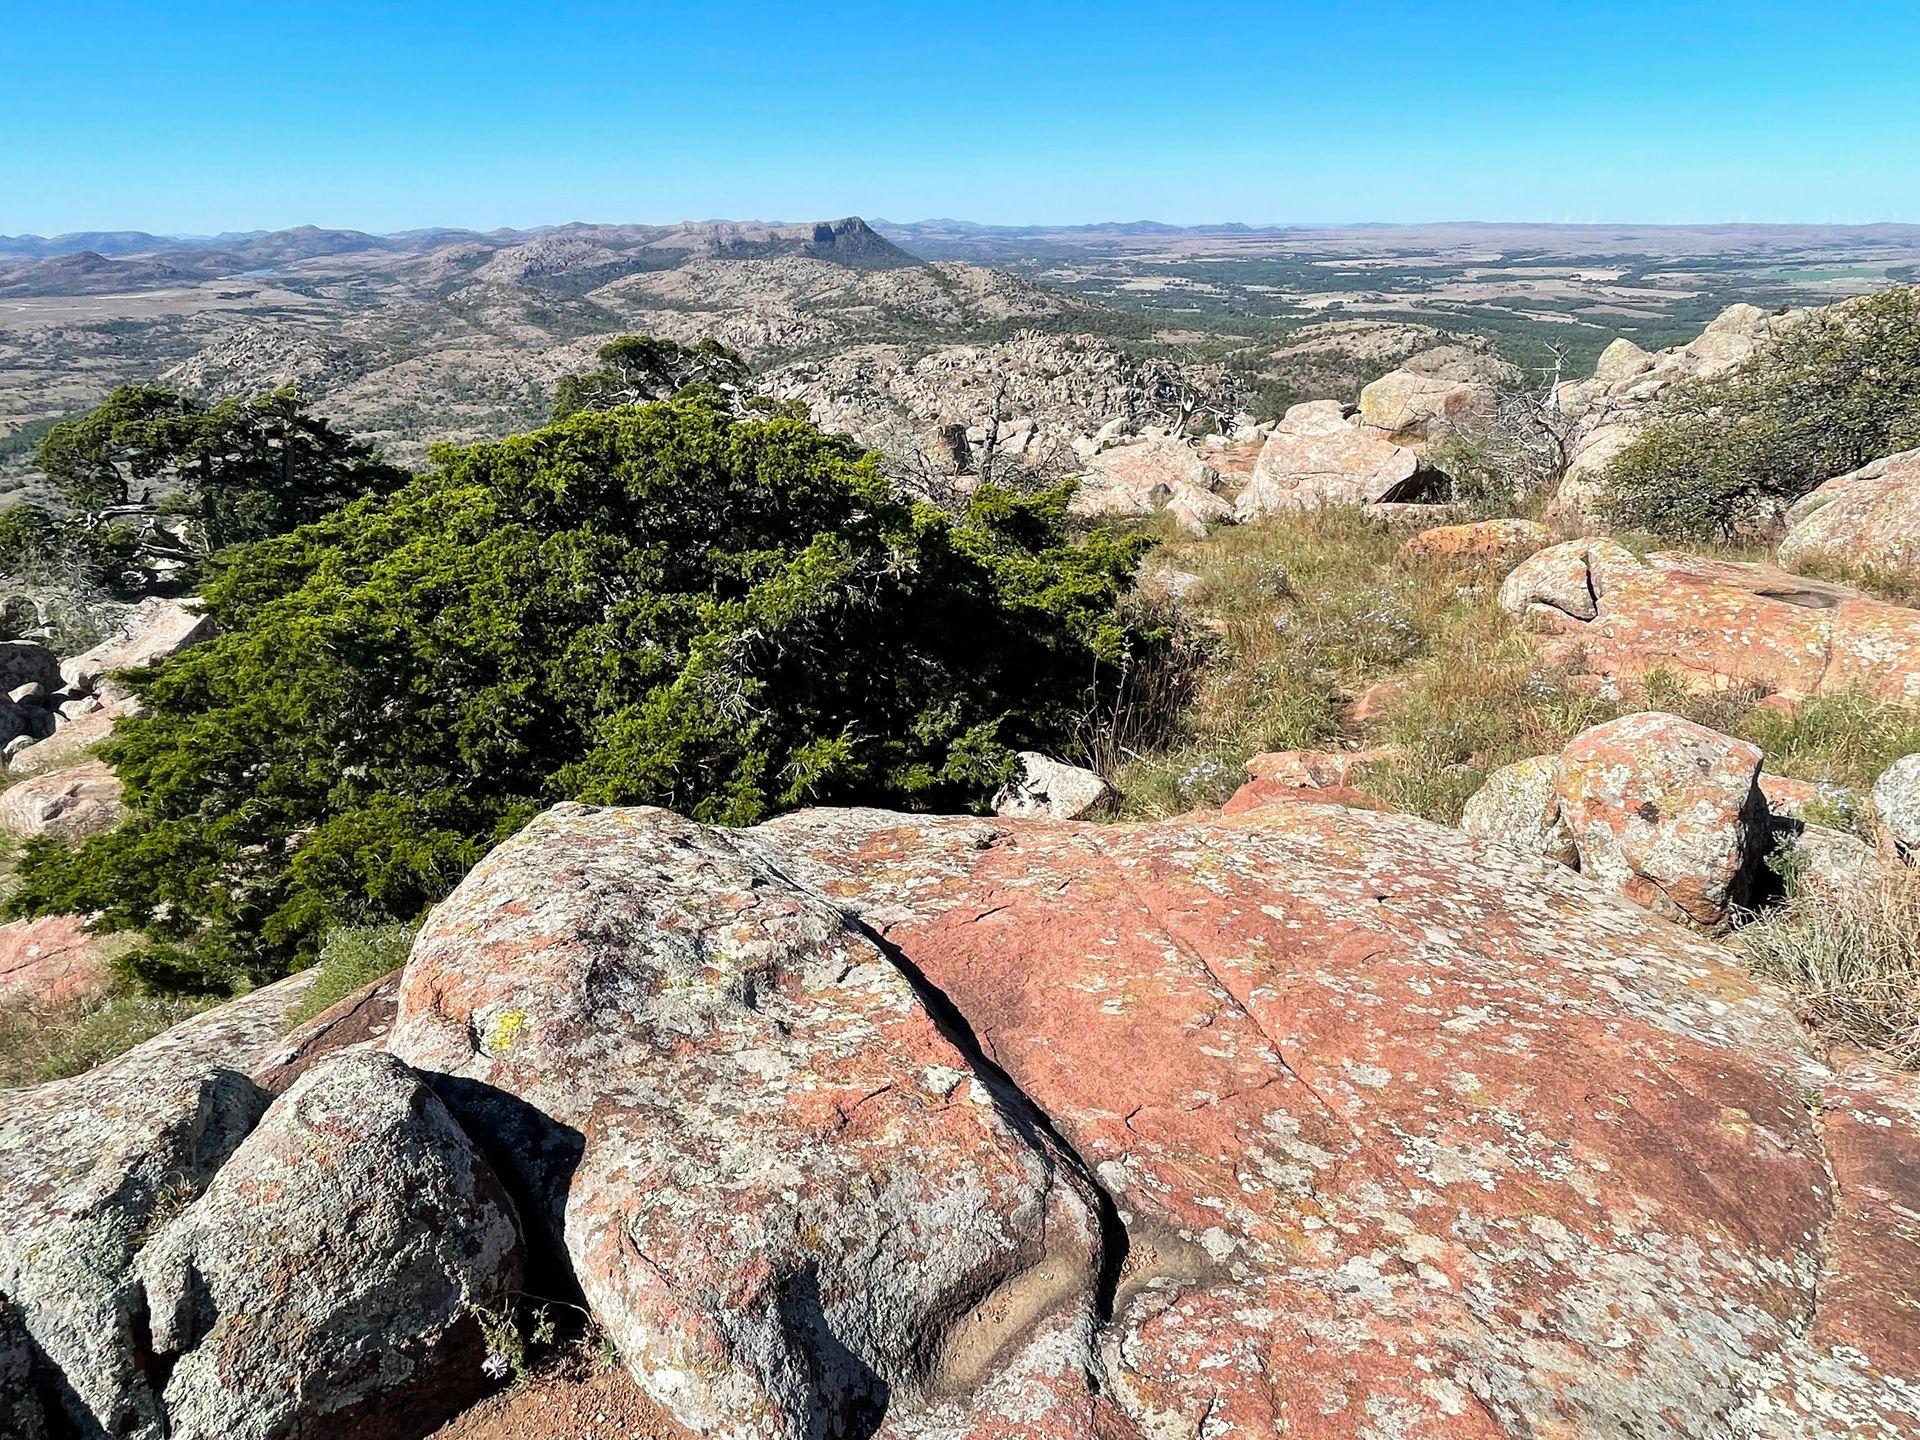 An expansive view of rocks and greenery from Mount Scott.